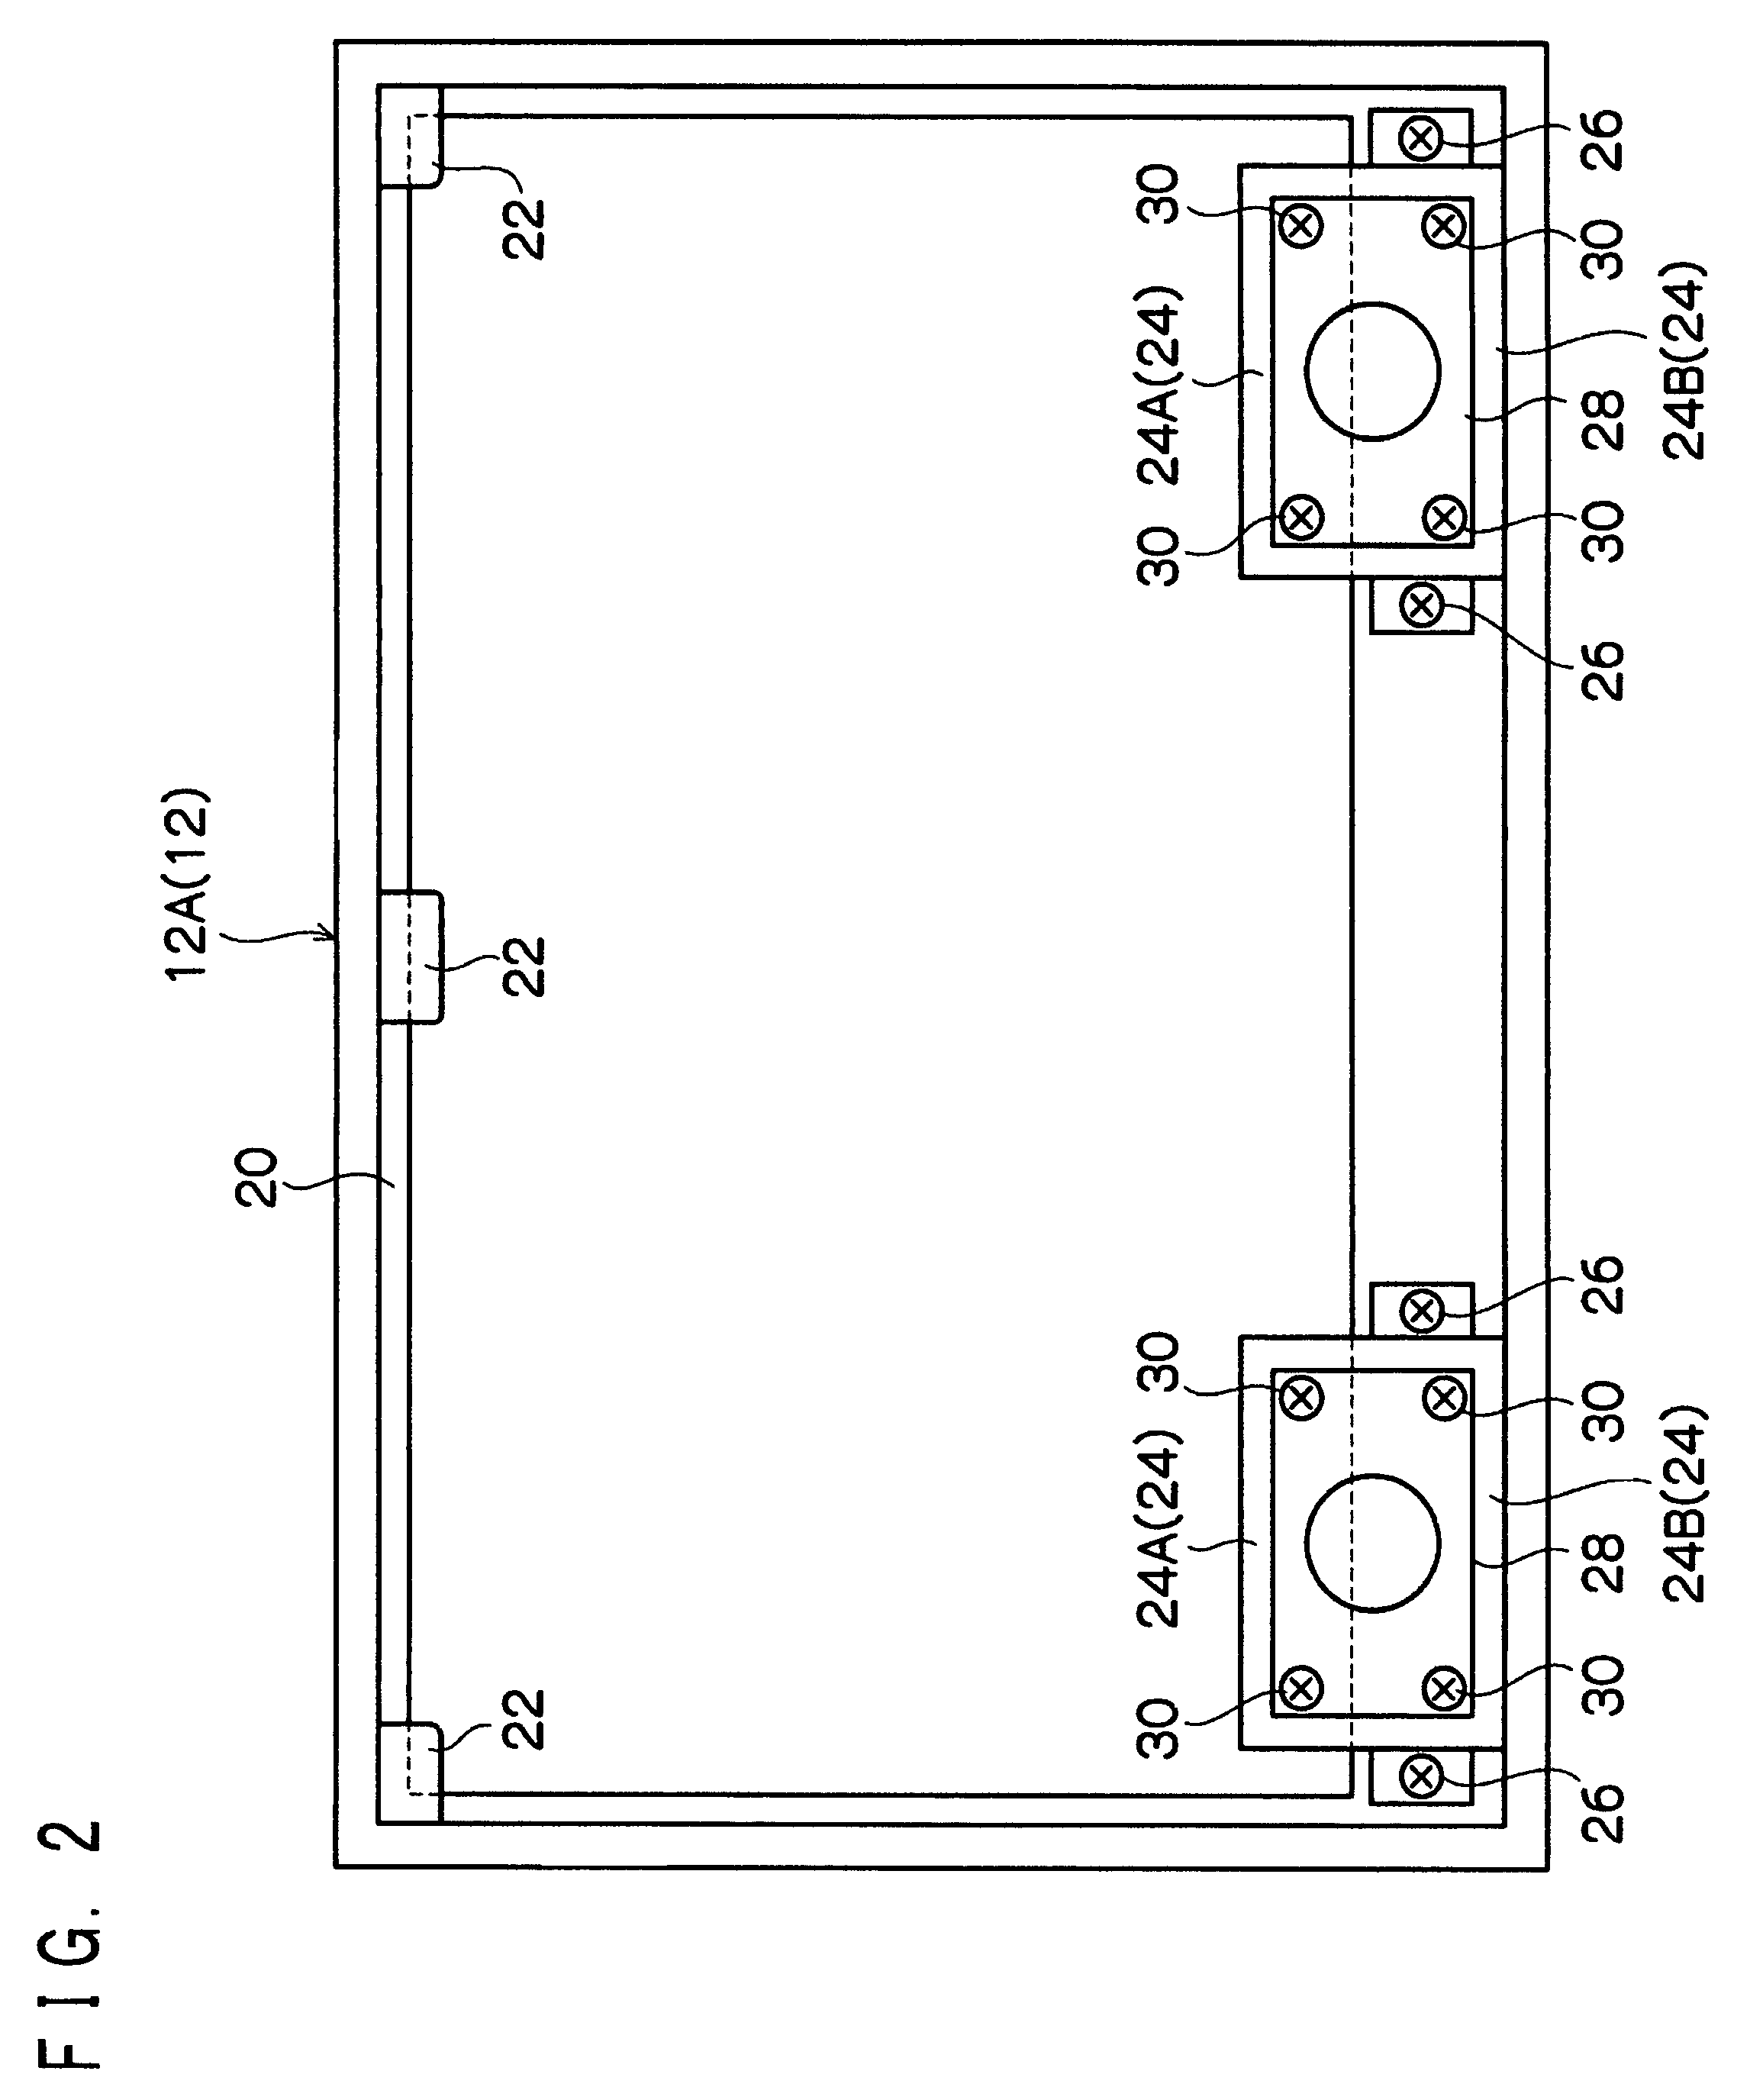 Combination speaker support, display support, and sound guide